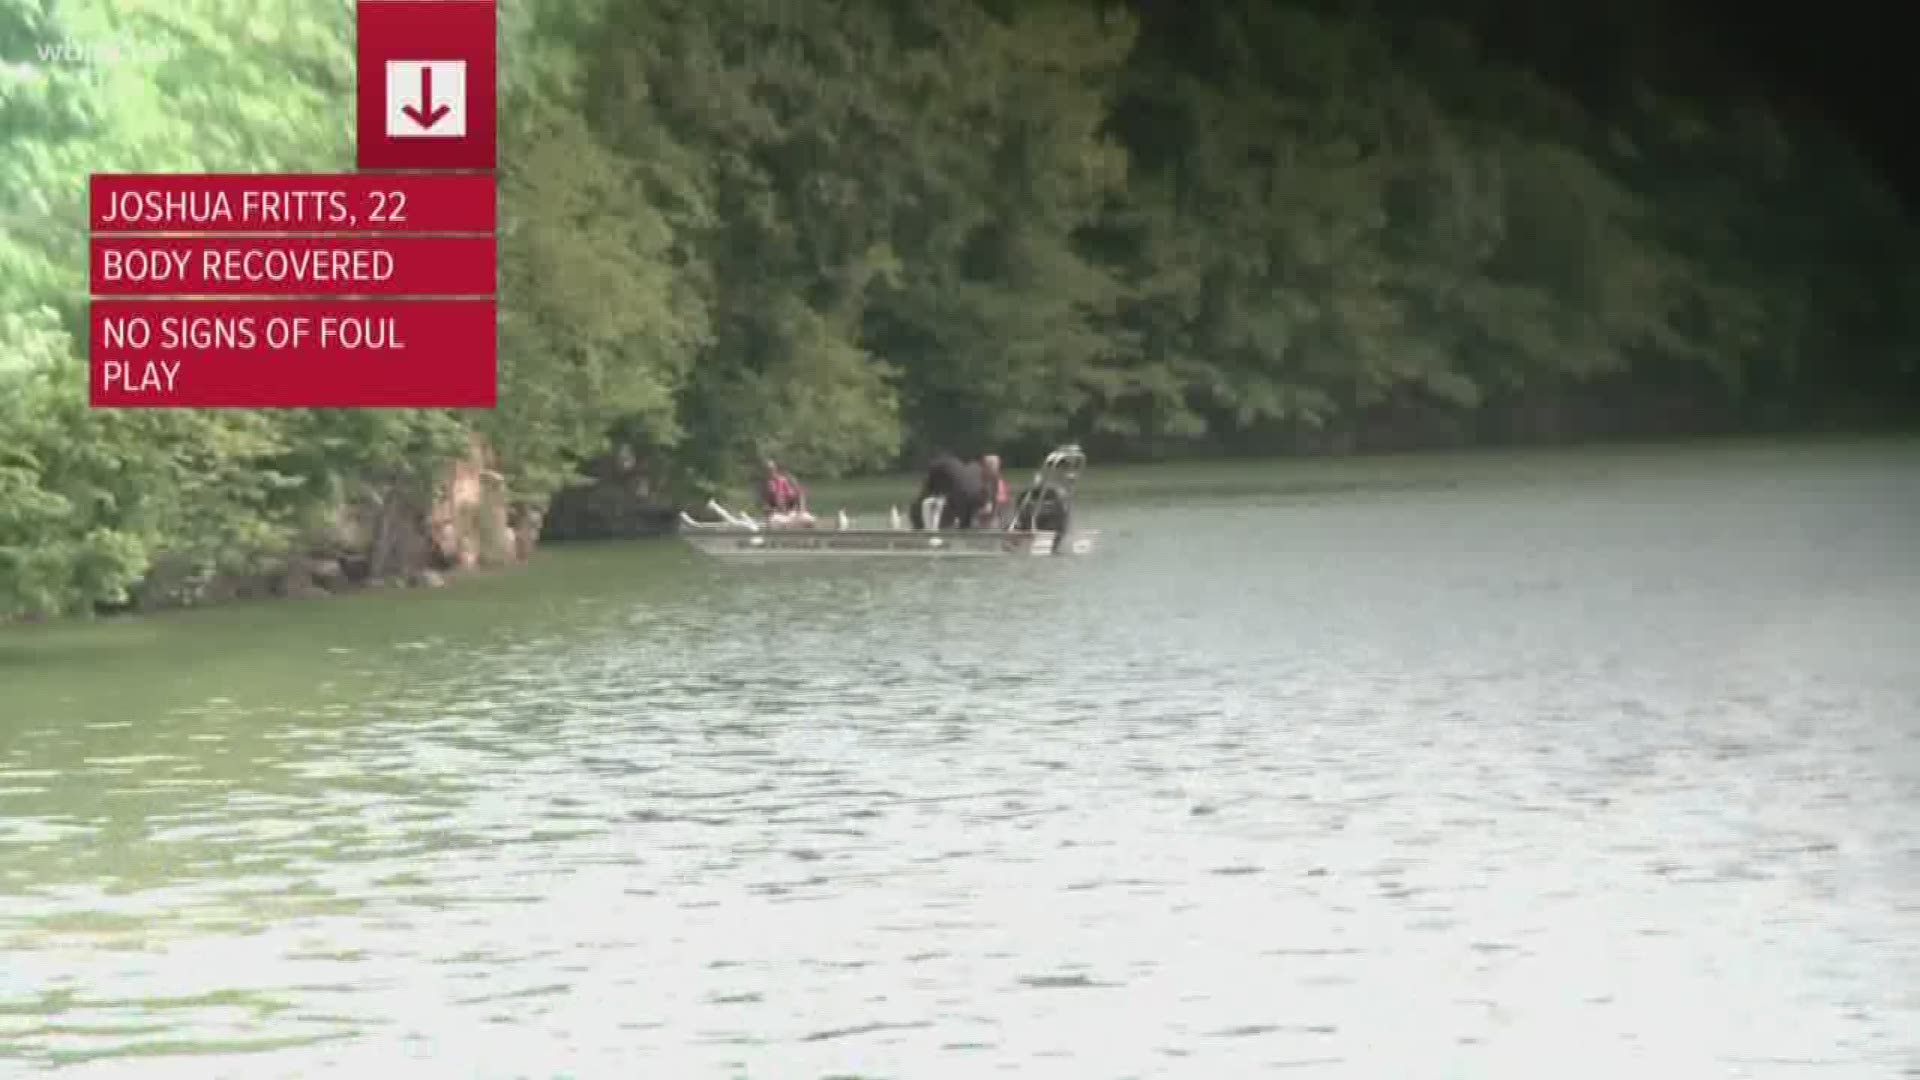 The Knox County Sheriff's Office is identifying the man who was found dead in the water at Melton Hill Park. Witnesses say 22-year-old Joshua Fritts of Loudon jumped off a cliff into the water, but did not resurface.